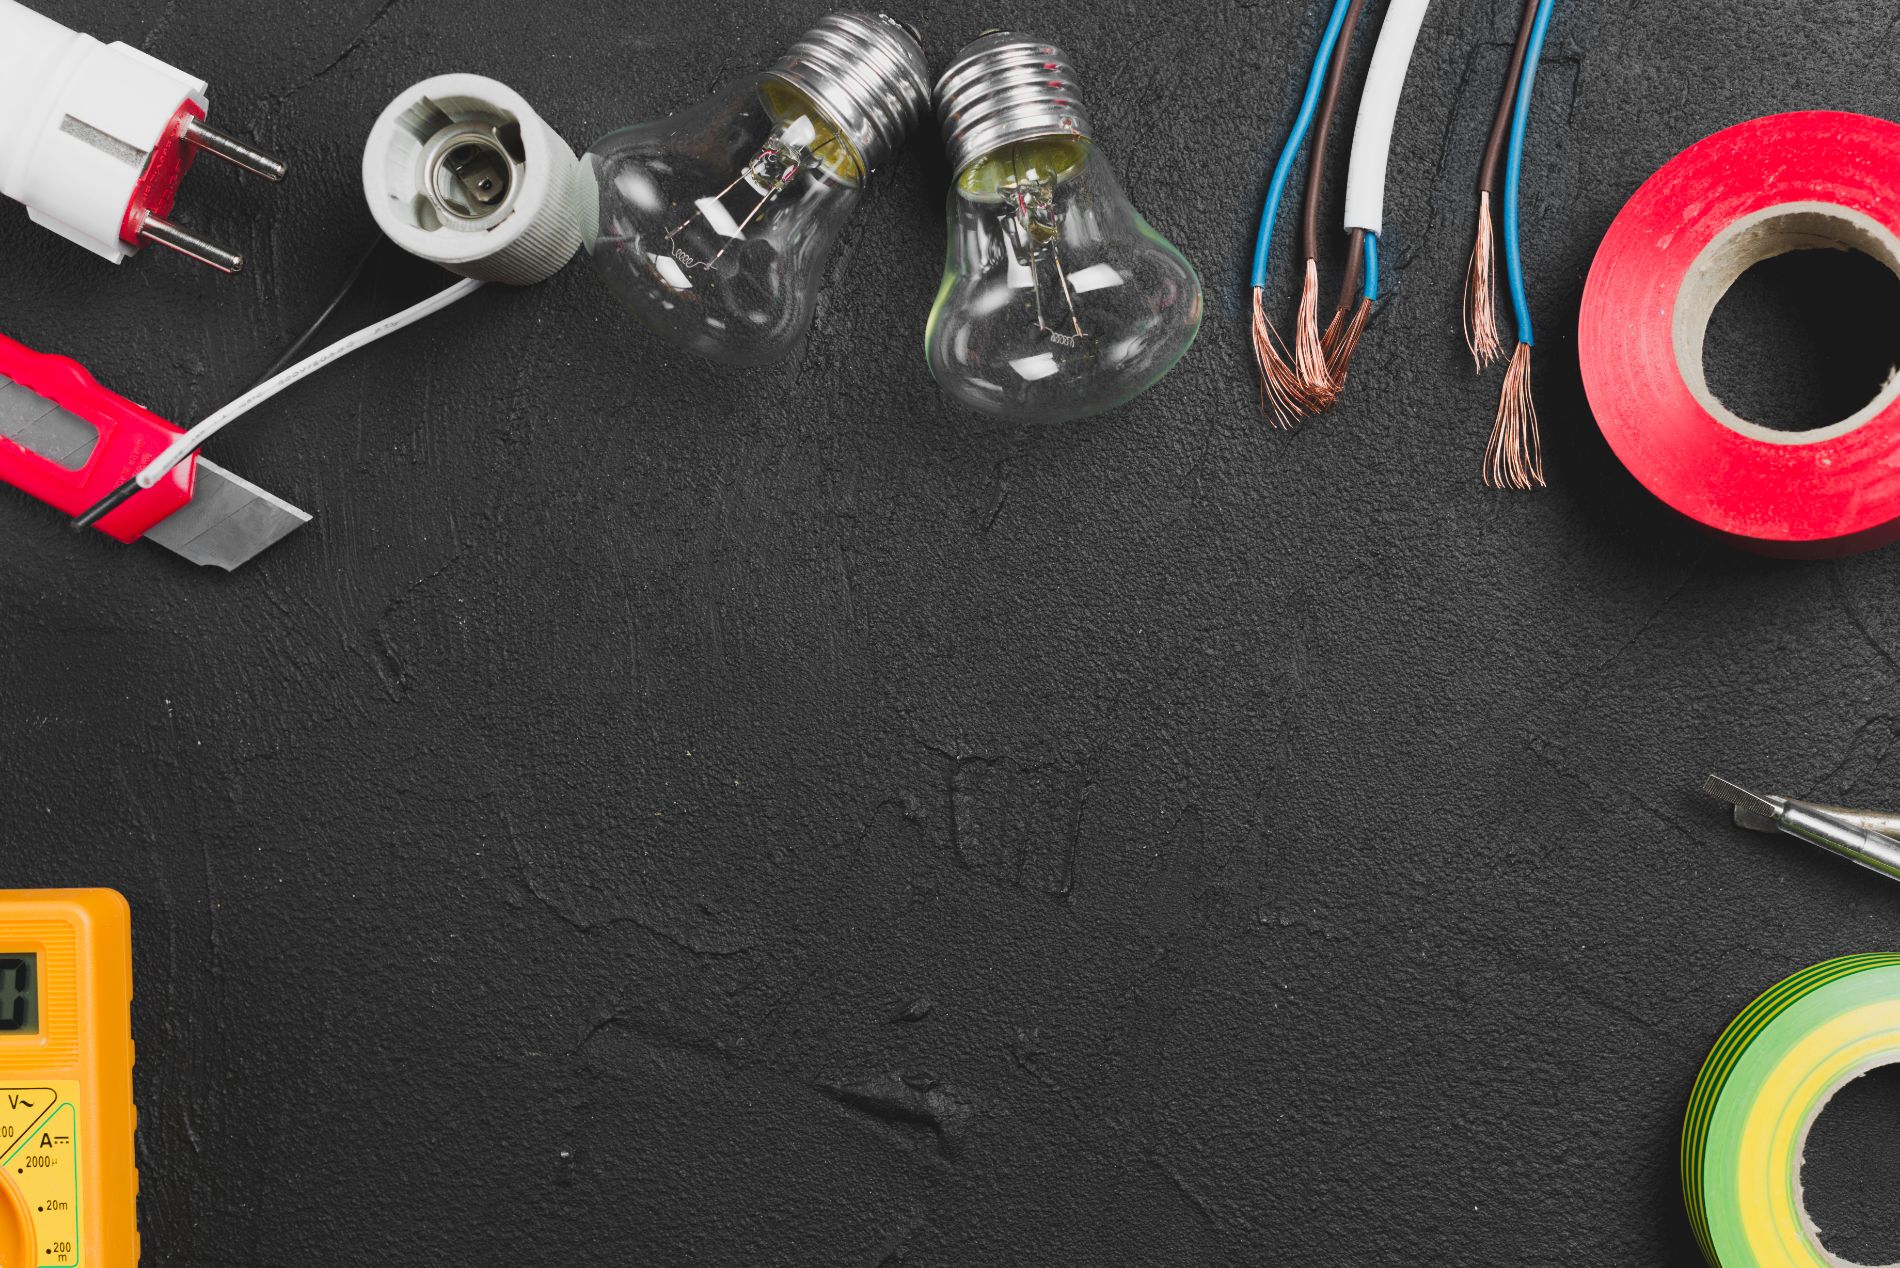 DIY Home Electrical Repairs: Safety Tips and Common Fixes